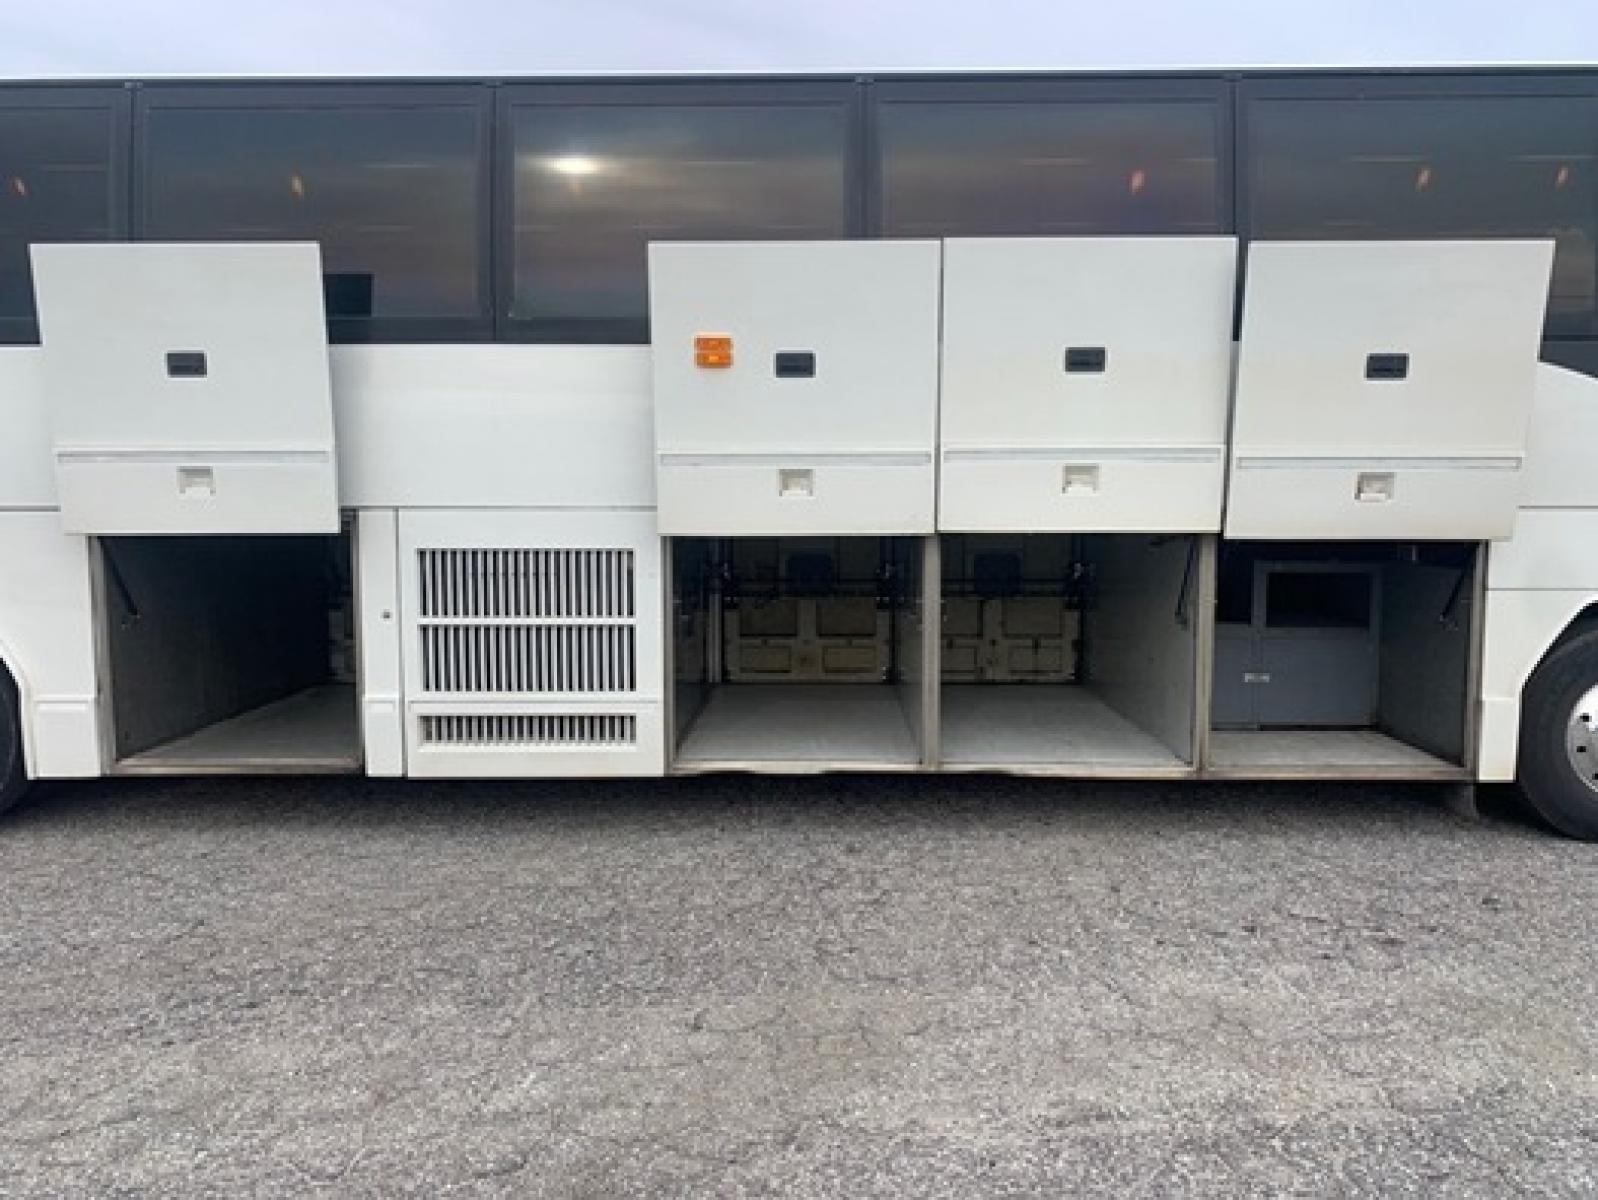 1995 White Prevost HS-45 with an Diesel engine, Allison transmission, 0.000000, 0.000000 - 1995 PREVOST HS-45 - Series 60 Detroit Diesel - Allison Automatic Transmission - 45' - Alloy Wheels - 56 Passengers - Enclosed Parcel Racks - 3 Flat Screens and DVD - Restroom - One Owner - Southern Coach Approx 1.1mil recent motor trans change. - Photo #9